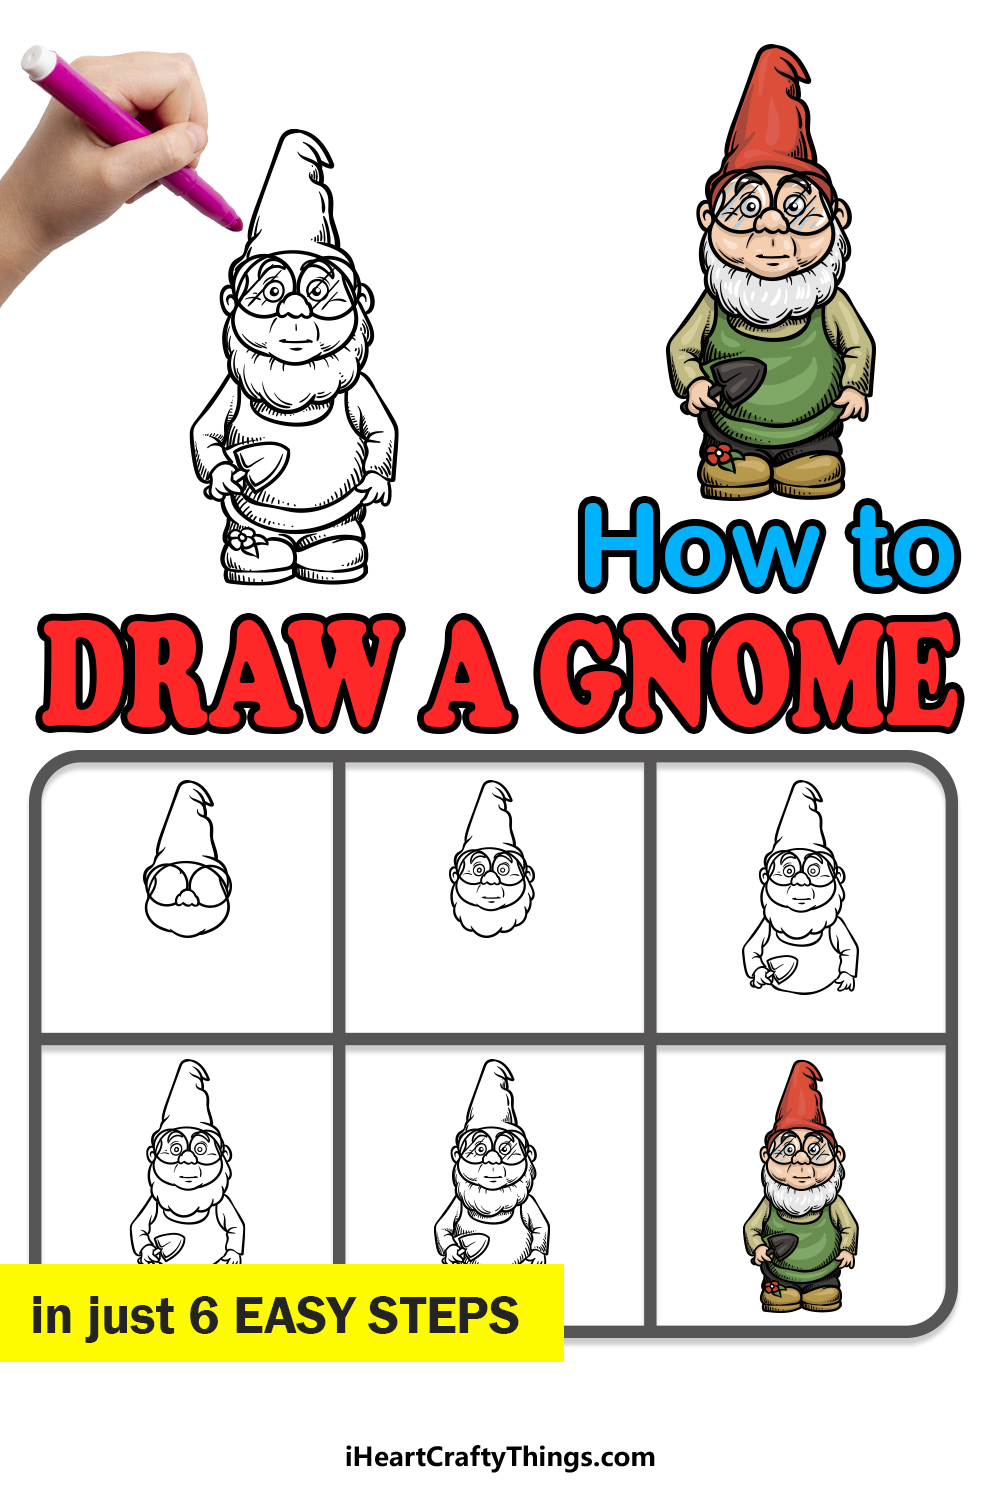 how to draw a Gnome in 6 easy steps